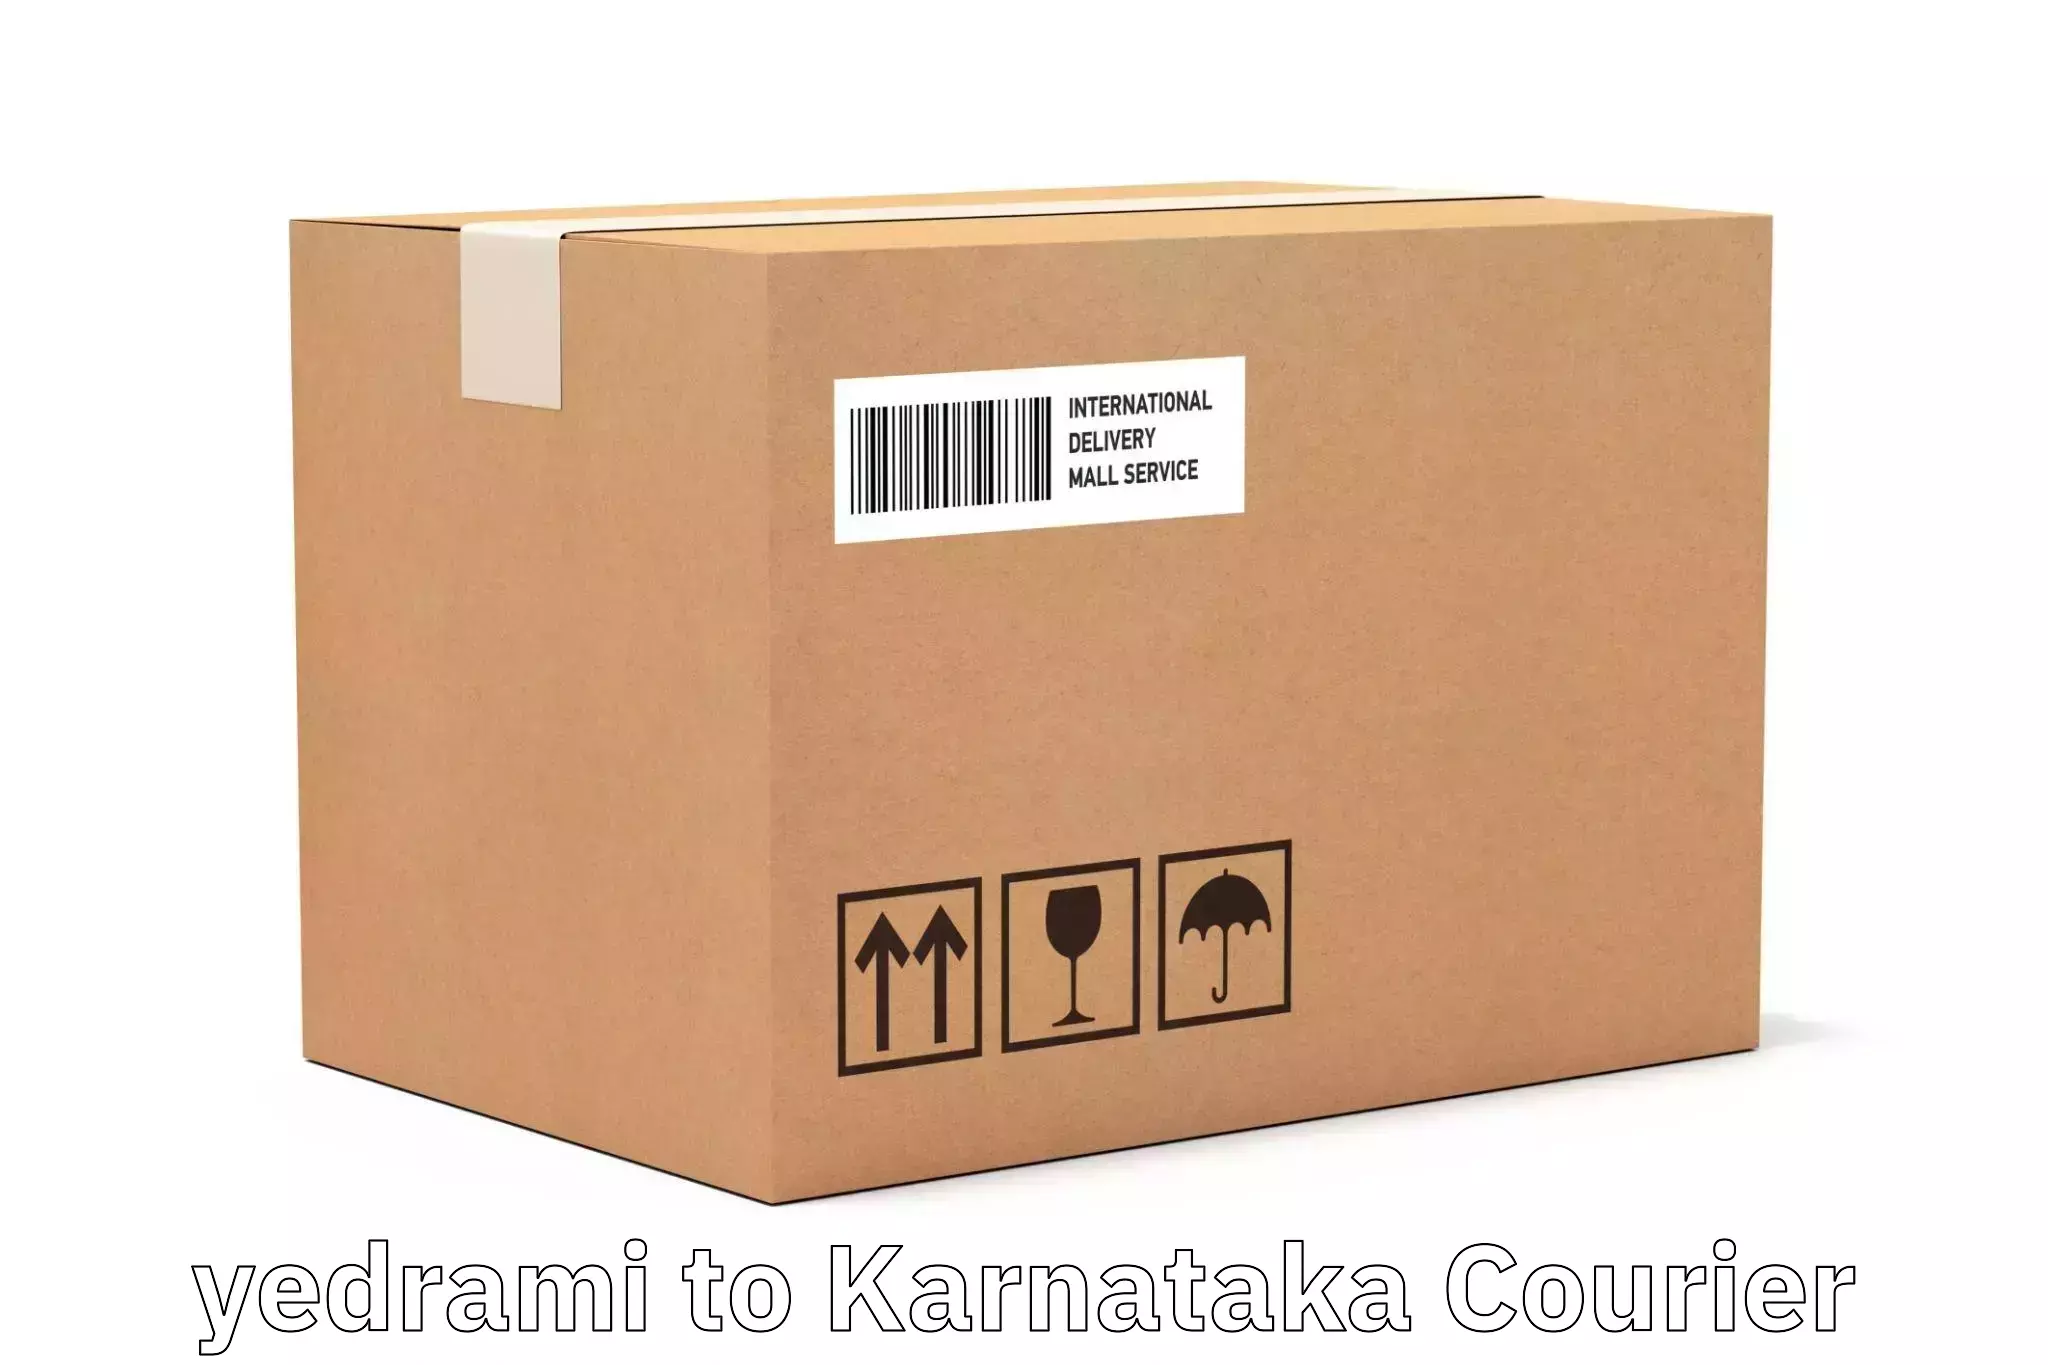 Sustainable delivery practices in yedrami to Karnataka